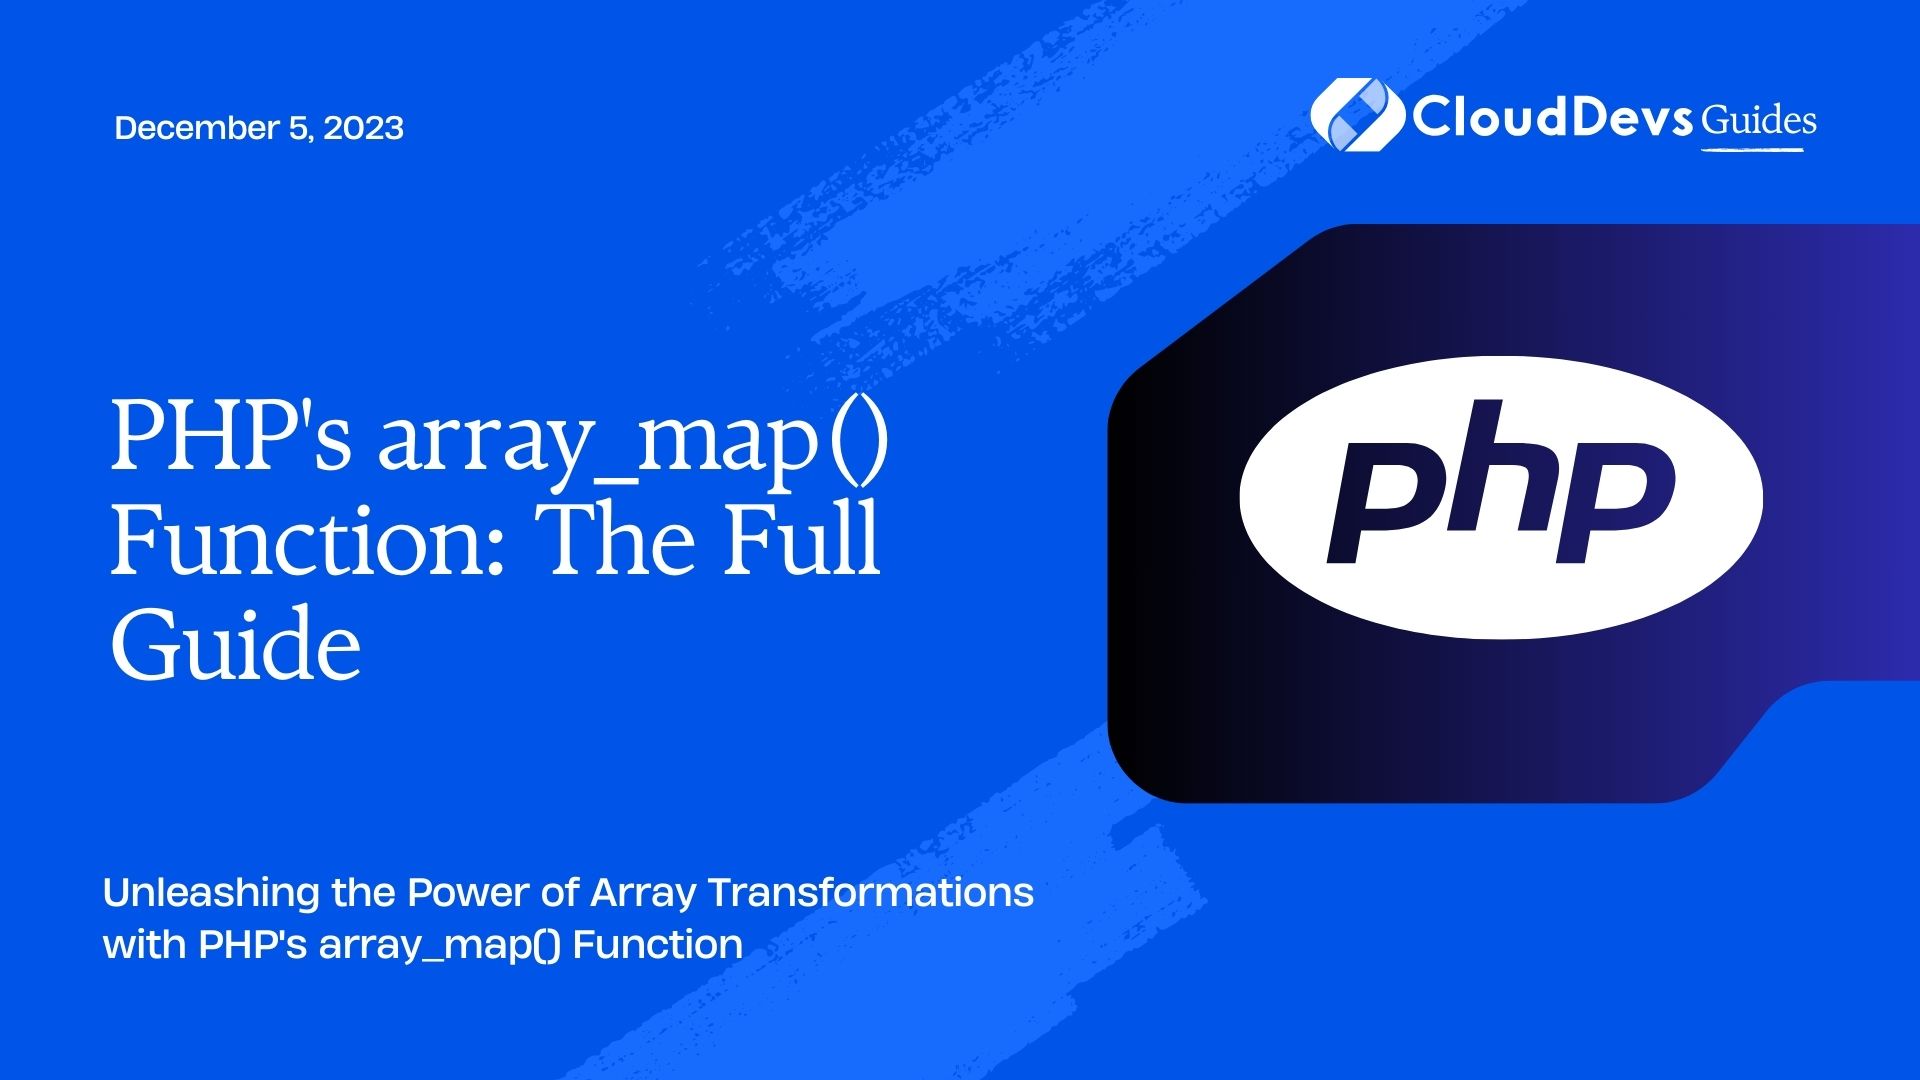 PHP's array_map() Function: The Full Guide